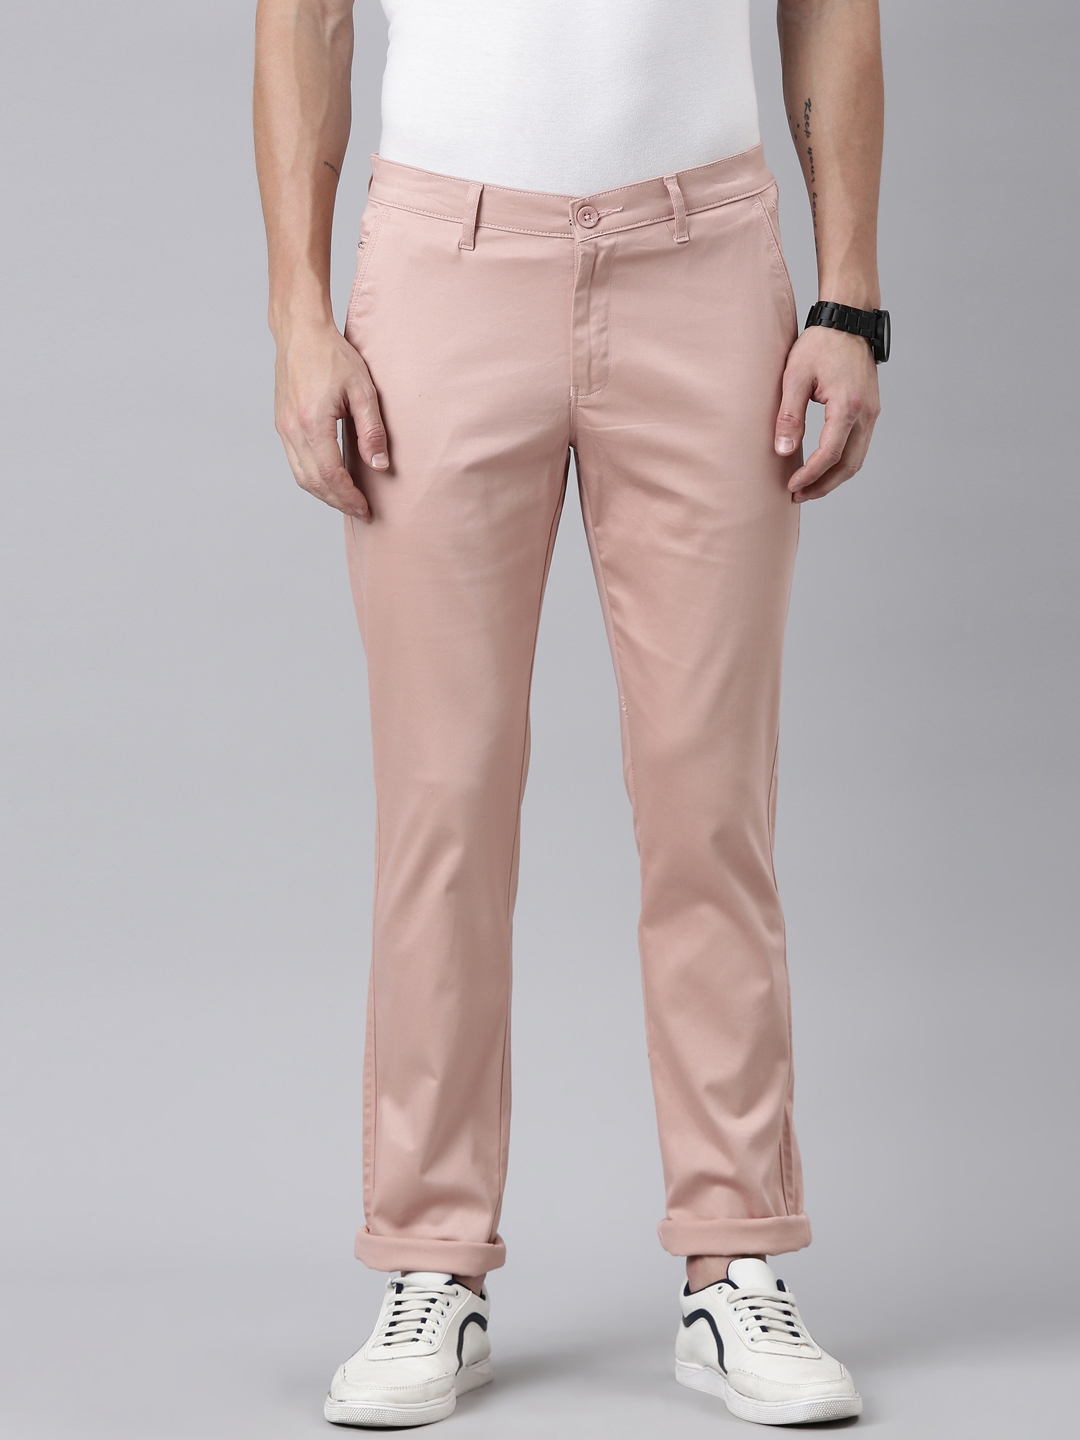 Limehaus | Light Pink Slim Fit Trousers | SuitDirect.co.uk